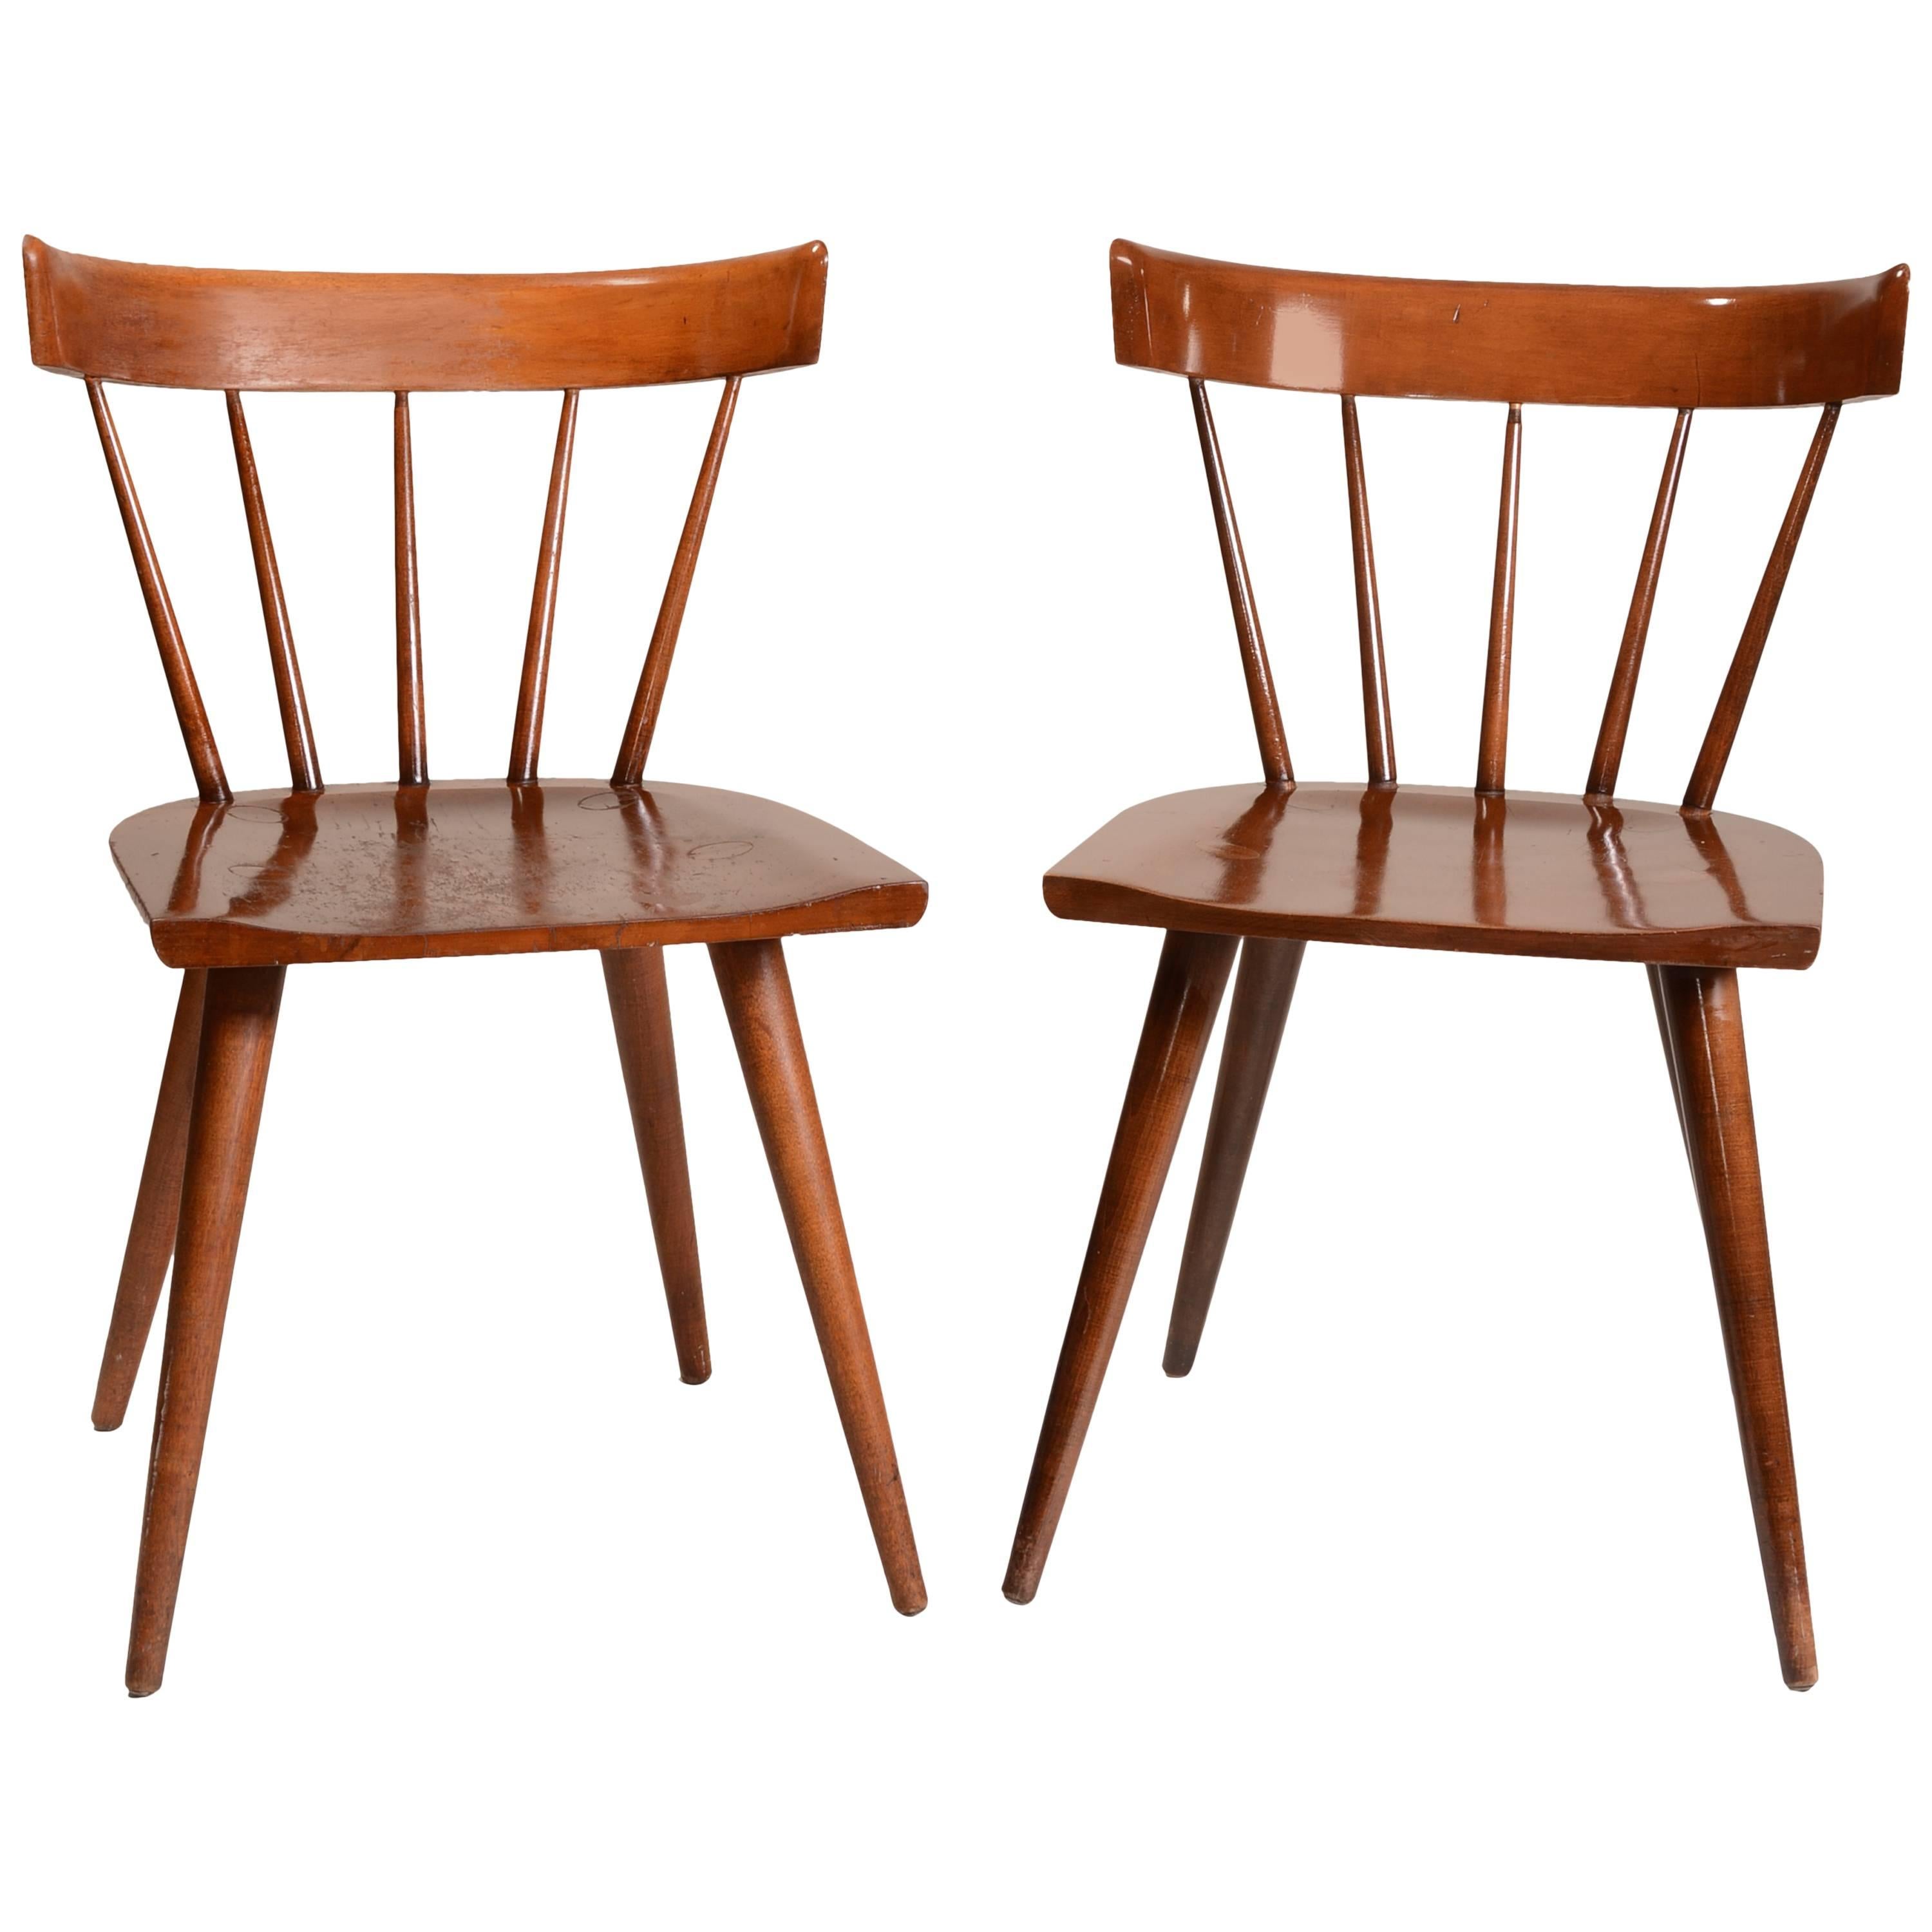 Set of Two Planner Group Dining Chairs by Paul McCobb for Winchendon Furniture